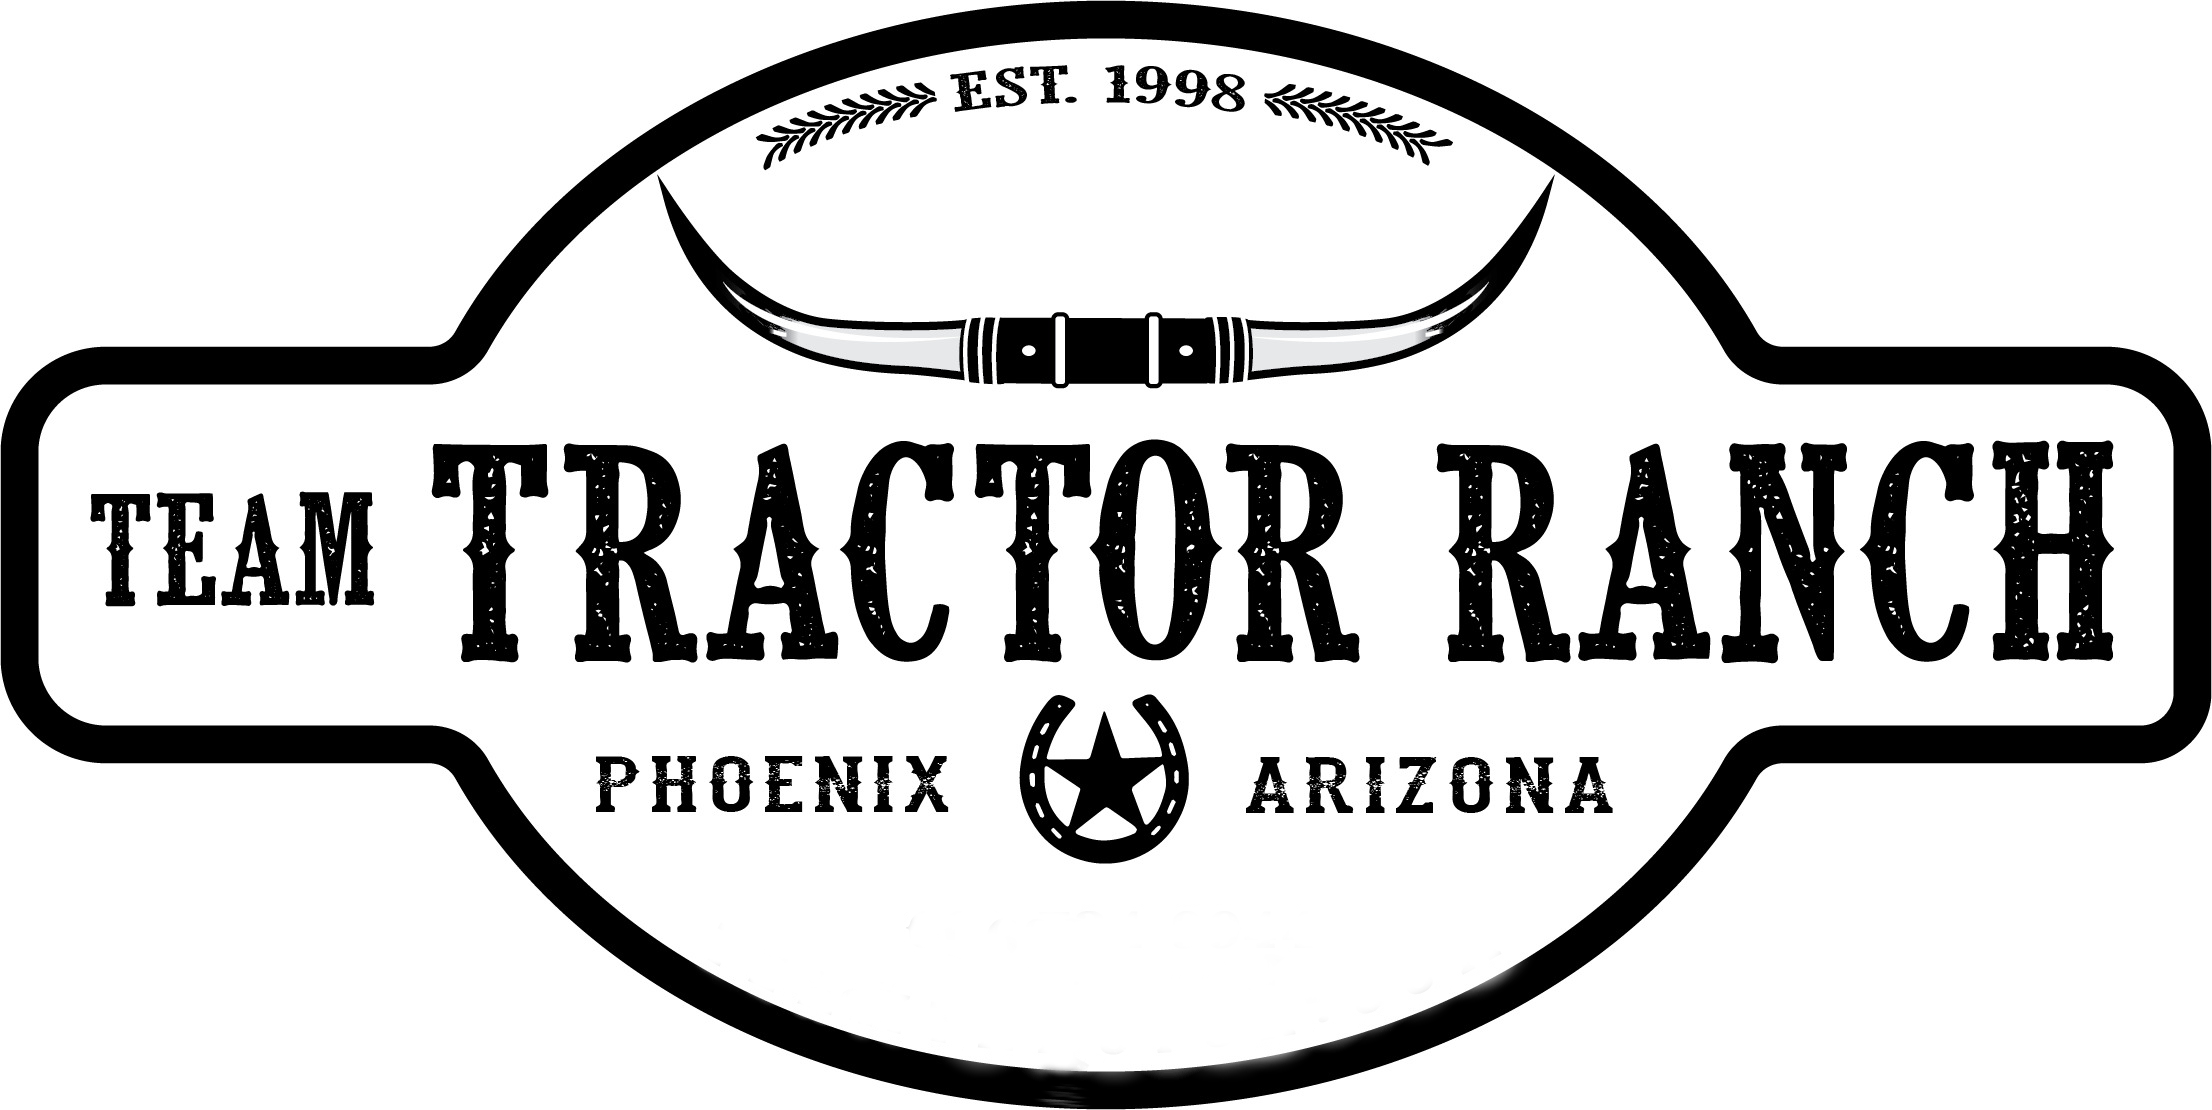 Team Tractor & Equipment proudly serves Phoenix, Arizona and our neighbors in Los Angeles, San Diego, Las Vegas and Albuquerque